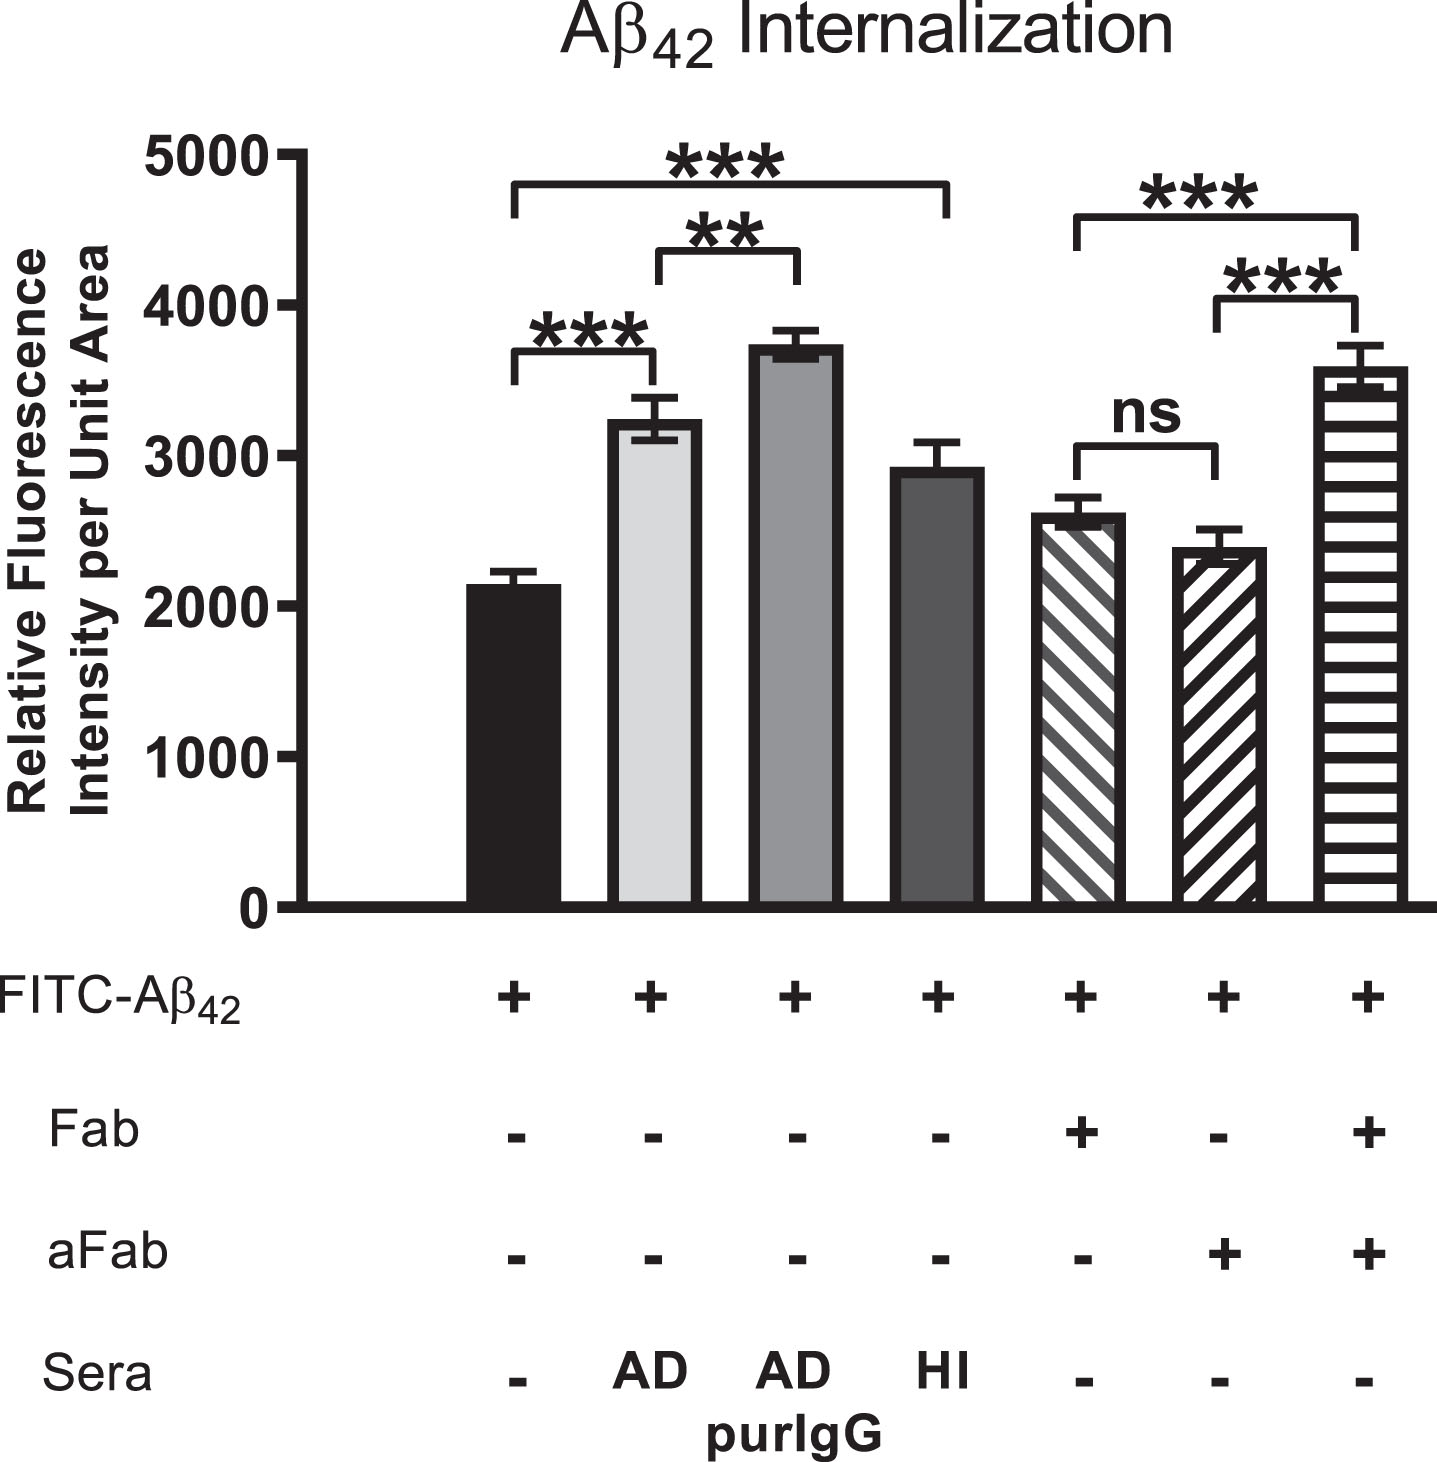 Aβ42 internalization is driven primarily by IgG cross-linking on neuronal surfaces. Cells were first treated with FITC-Aβ42 to establish a baseline level of Aβ42 internalization in the absence of other factors. Aβ42 was then co-administered with AD serum, purified IgG from AD sera, heat-inactivated (HI) AD sera (to disable binding of complement protein), monovalent F(ab) IgG fragments or monovalent F(ab) fragments co-treated with anti-F(ab) fragment secondary antibody (aFab). The latter was used to restore bivalency and thereby autoantibody cross-linking. In cells treated with monovalent F(ab) fragments (incapable of cross-linking) in conjunction with FITC-Aβ42, Aβ42 internalization was reduced compared to those treated with AD serum, purified IgG from AD serum or heat-inactivated serum. However, when media containing monovalent F(ab) fragments was supplemented with antibodies directed against F(ab) fragments to restore cross-linking abilities, the Aβ42 internalization rate was increased to a level comparable to that of purified IgG from AD serum. Fab, monovalent F(ab) fragment; aFab, anti-F(ab) fragment secondary antibody; AD, Alzheimer’s disease sera; AD purIgG, IgG purified from AD sera; HI, heat-inactivated; ns, non-significant; **p < 0.01; ***p < 0.001.